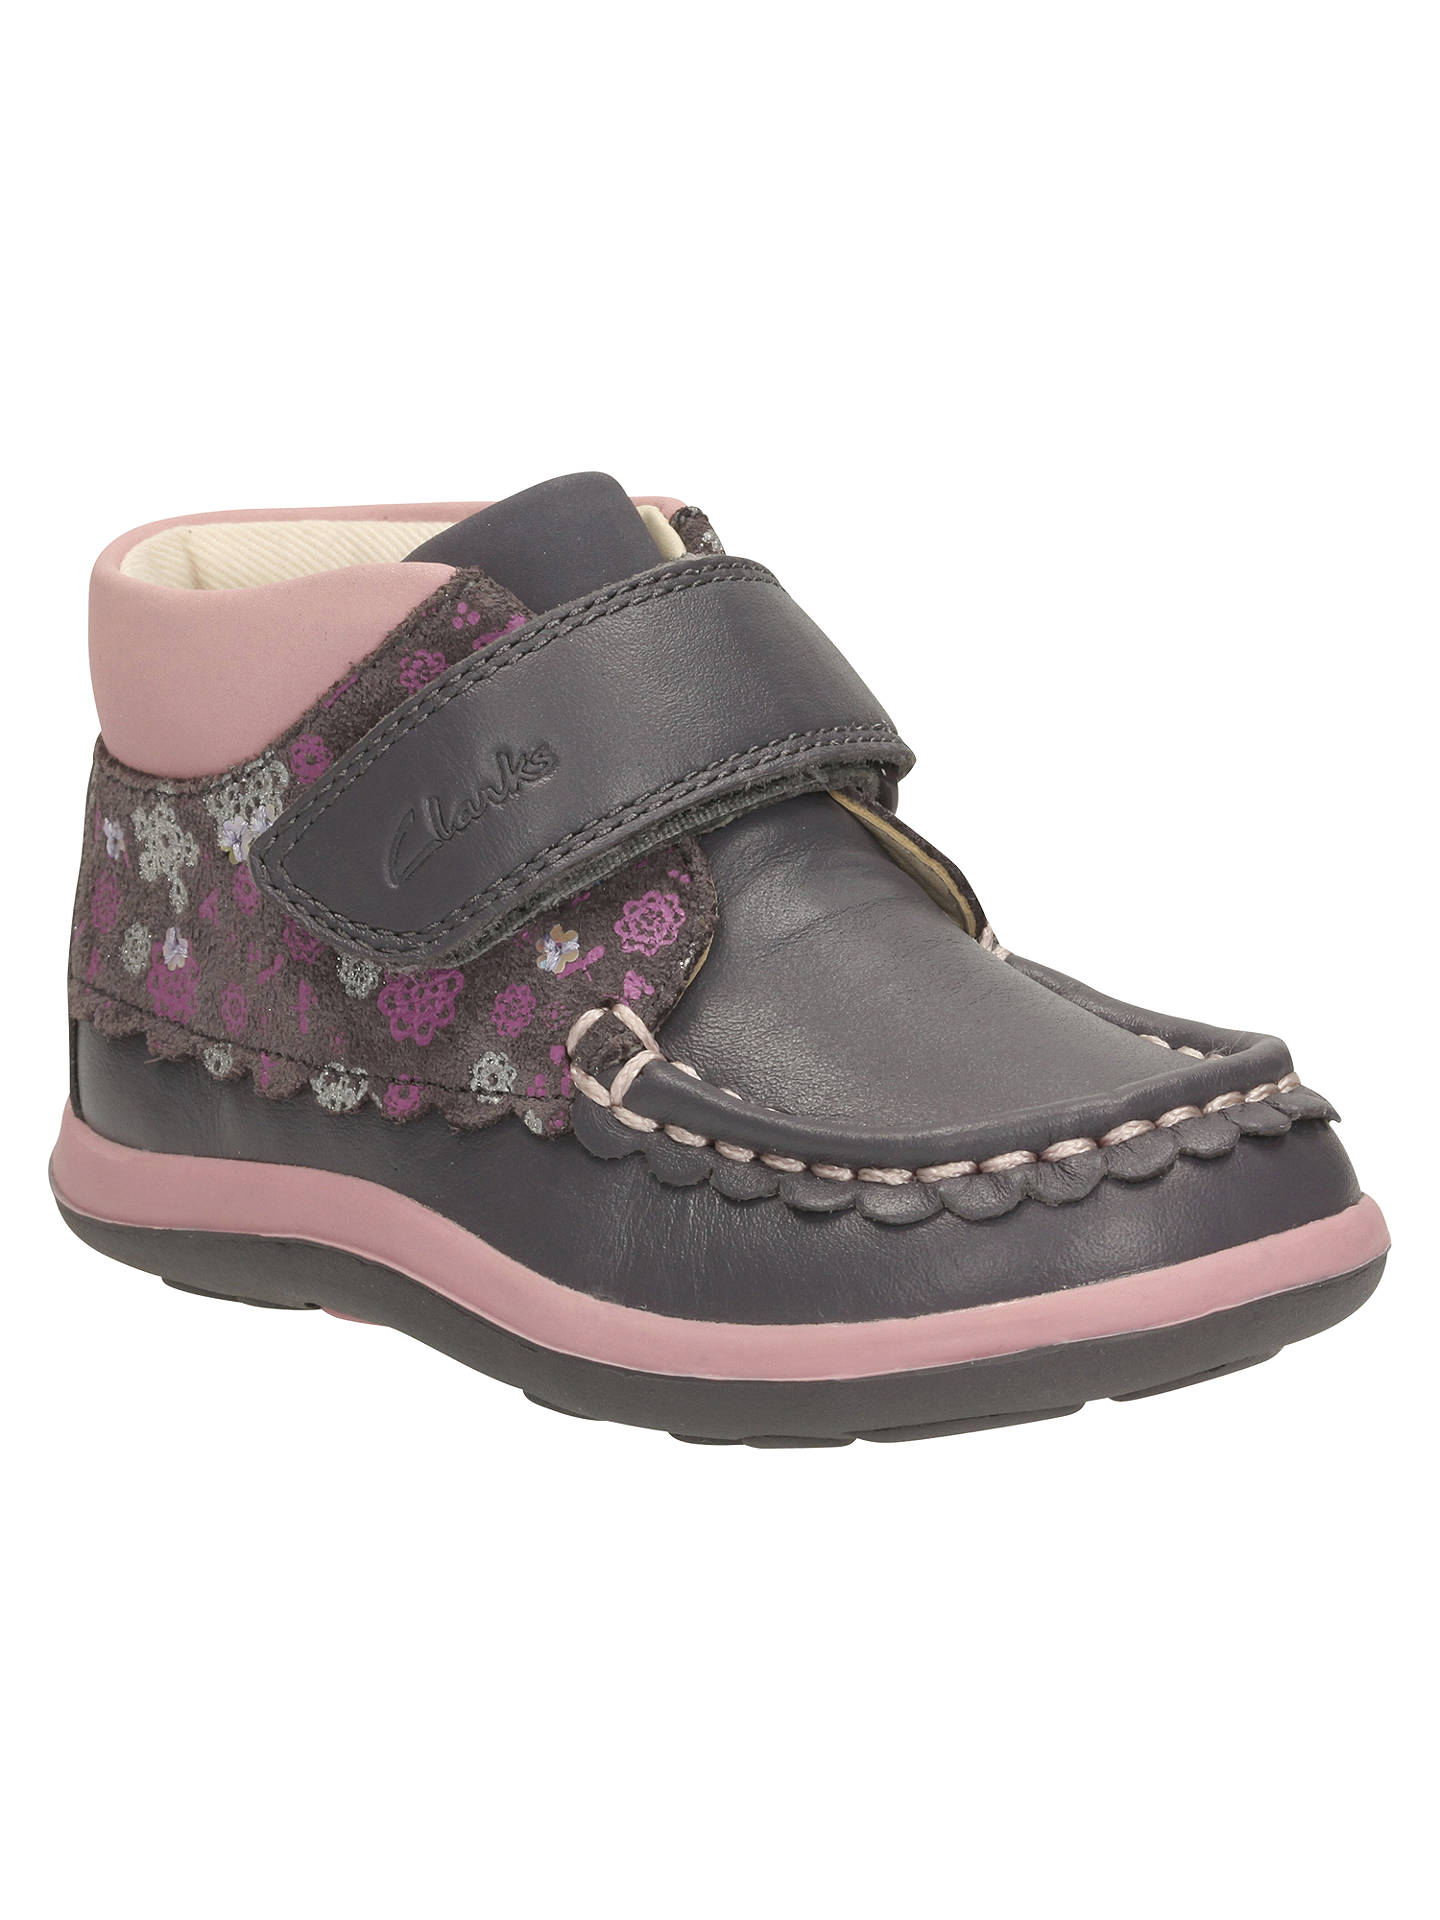 Clarks Children&#39;s Alanna Lyn Casual Shoes, Grey at John Lewis & Partners